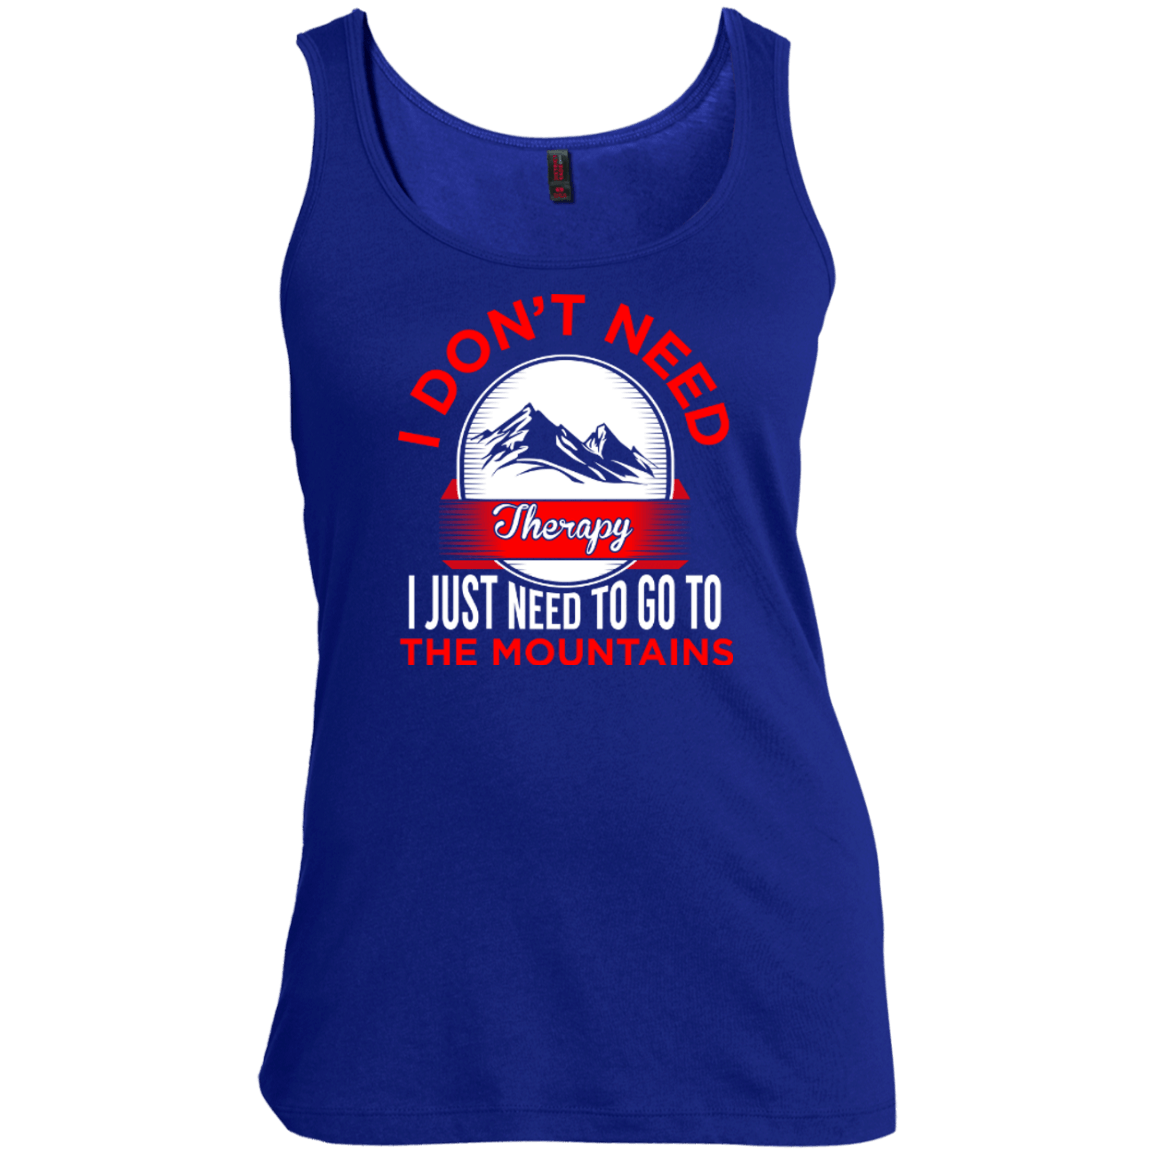 I Don't Need Therapy I Just Need To Go To The Mountains Tank Tops - Powderaddicts